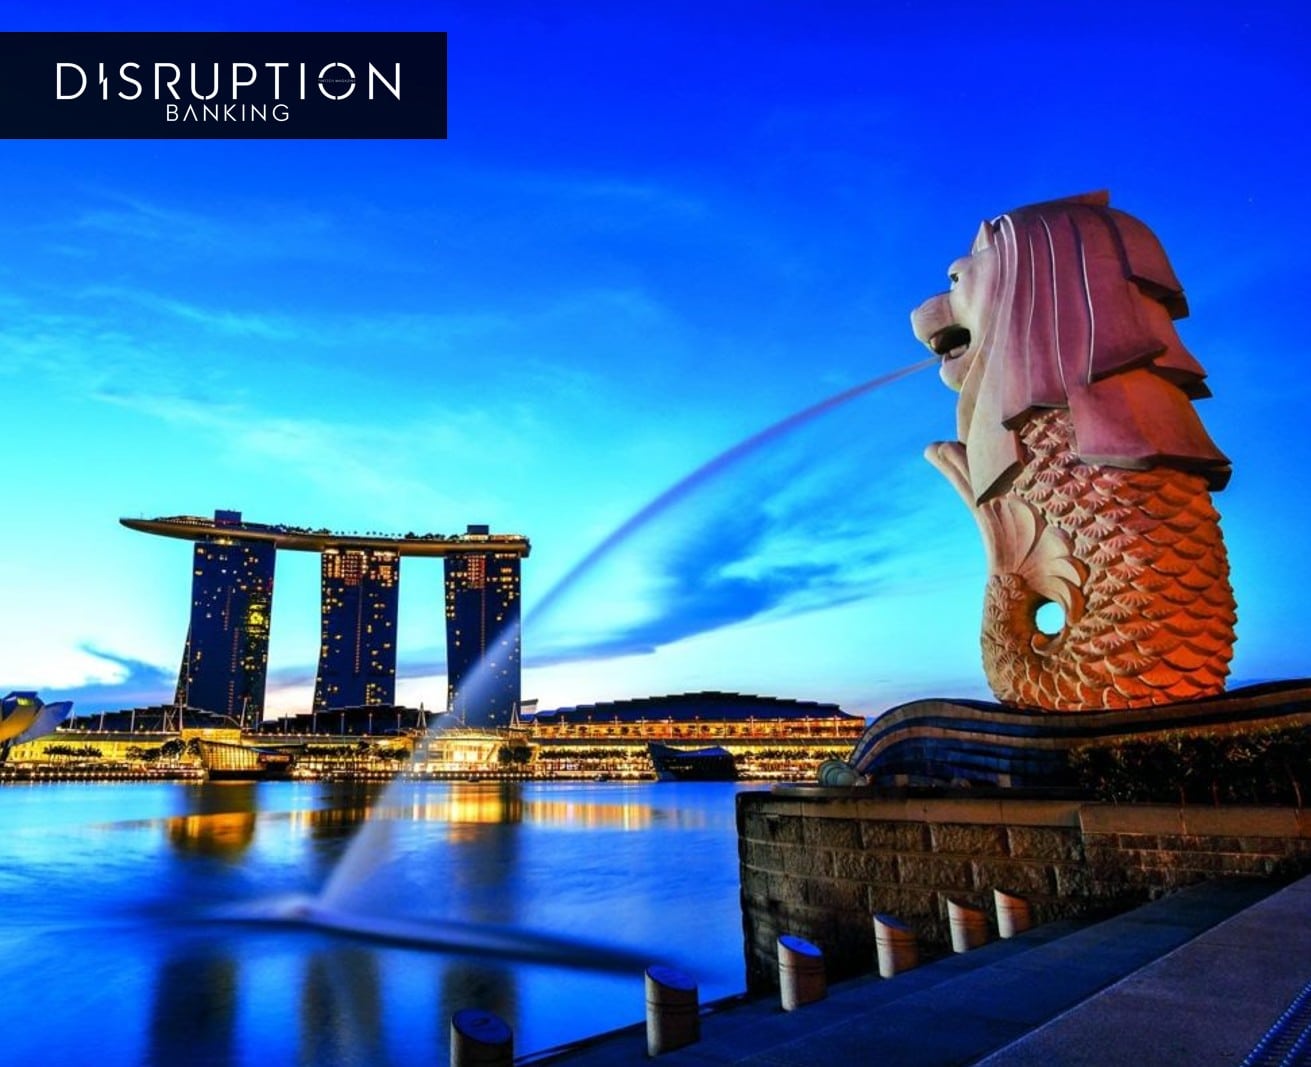 Singapore's Proposal to end Tax on Cryptocurrencies